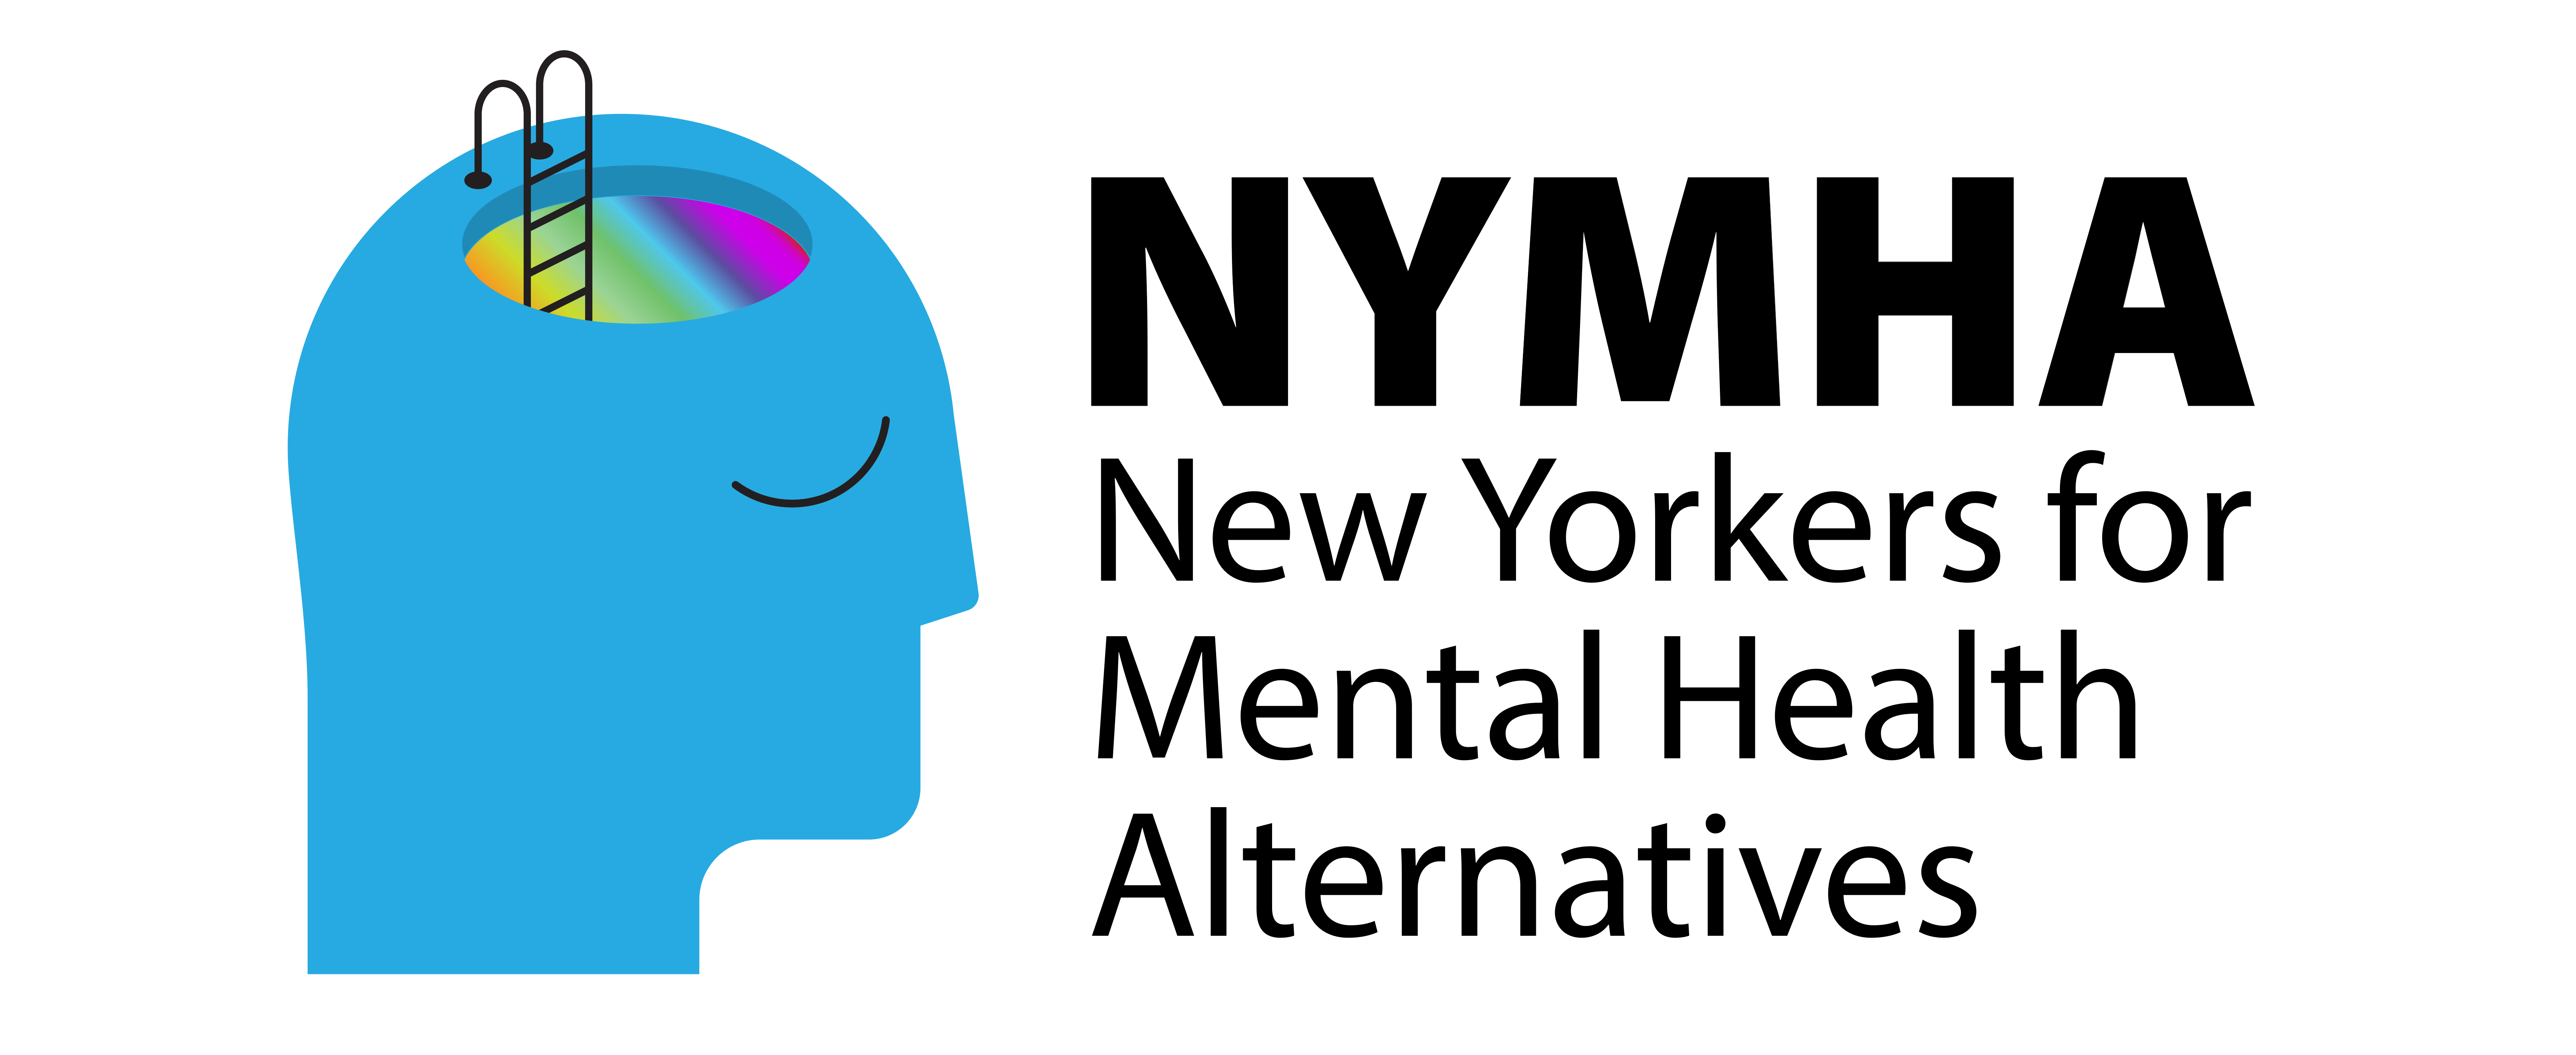 New Yorkers for Mental Health Alternatives